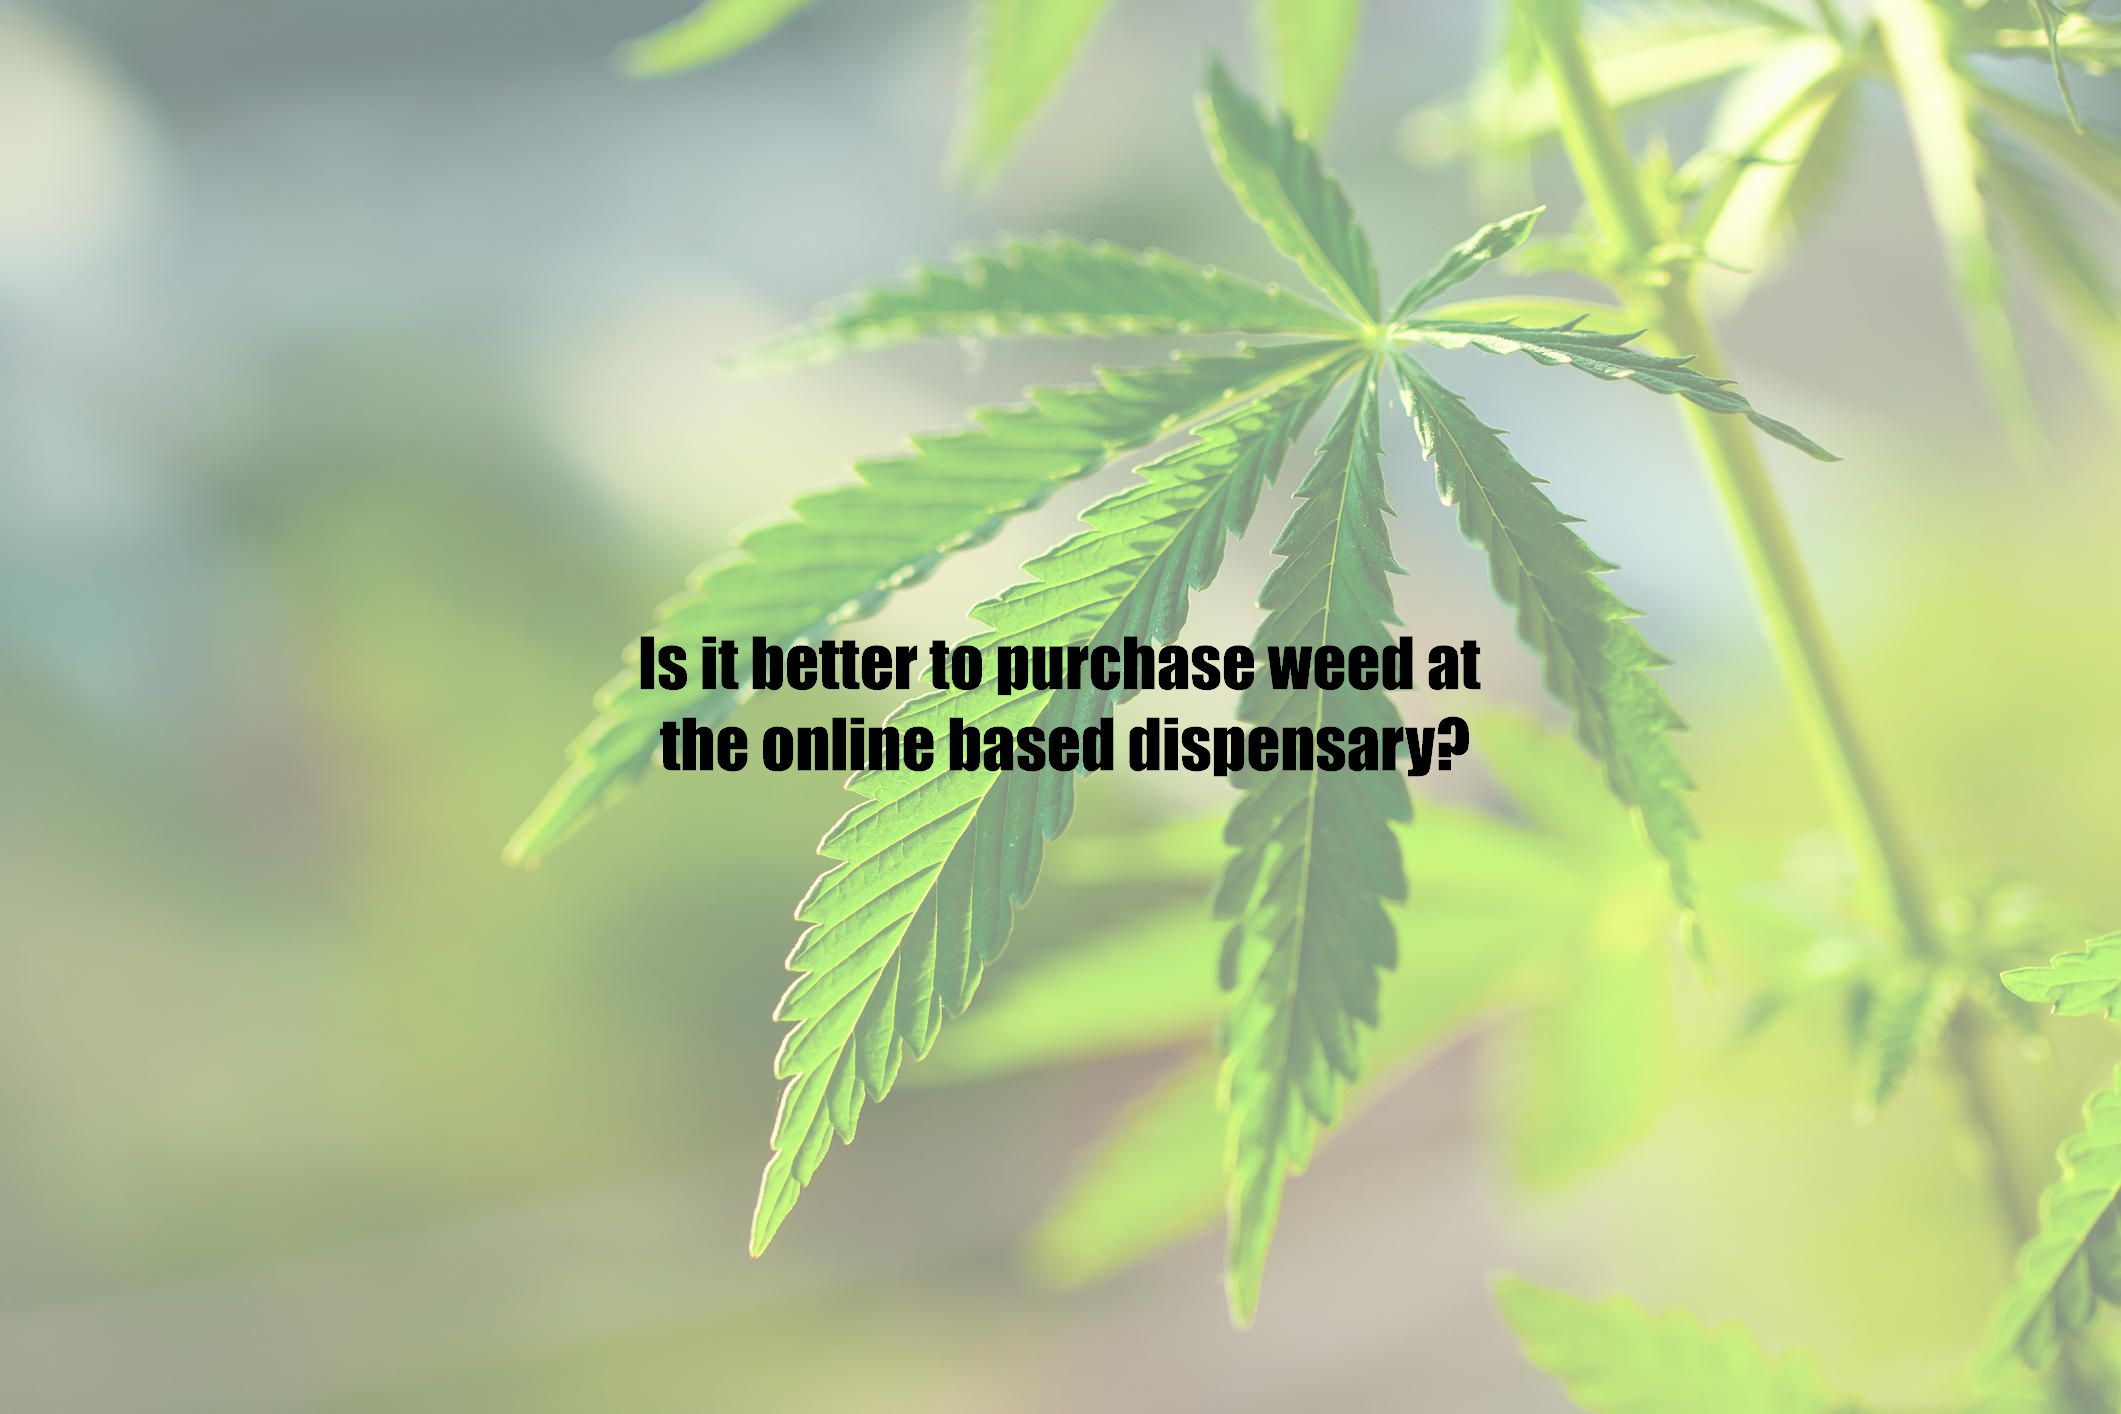 Is it better to purchase weed at the online based dispensary?